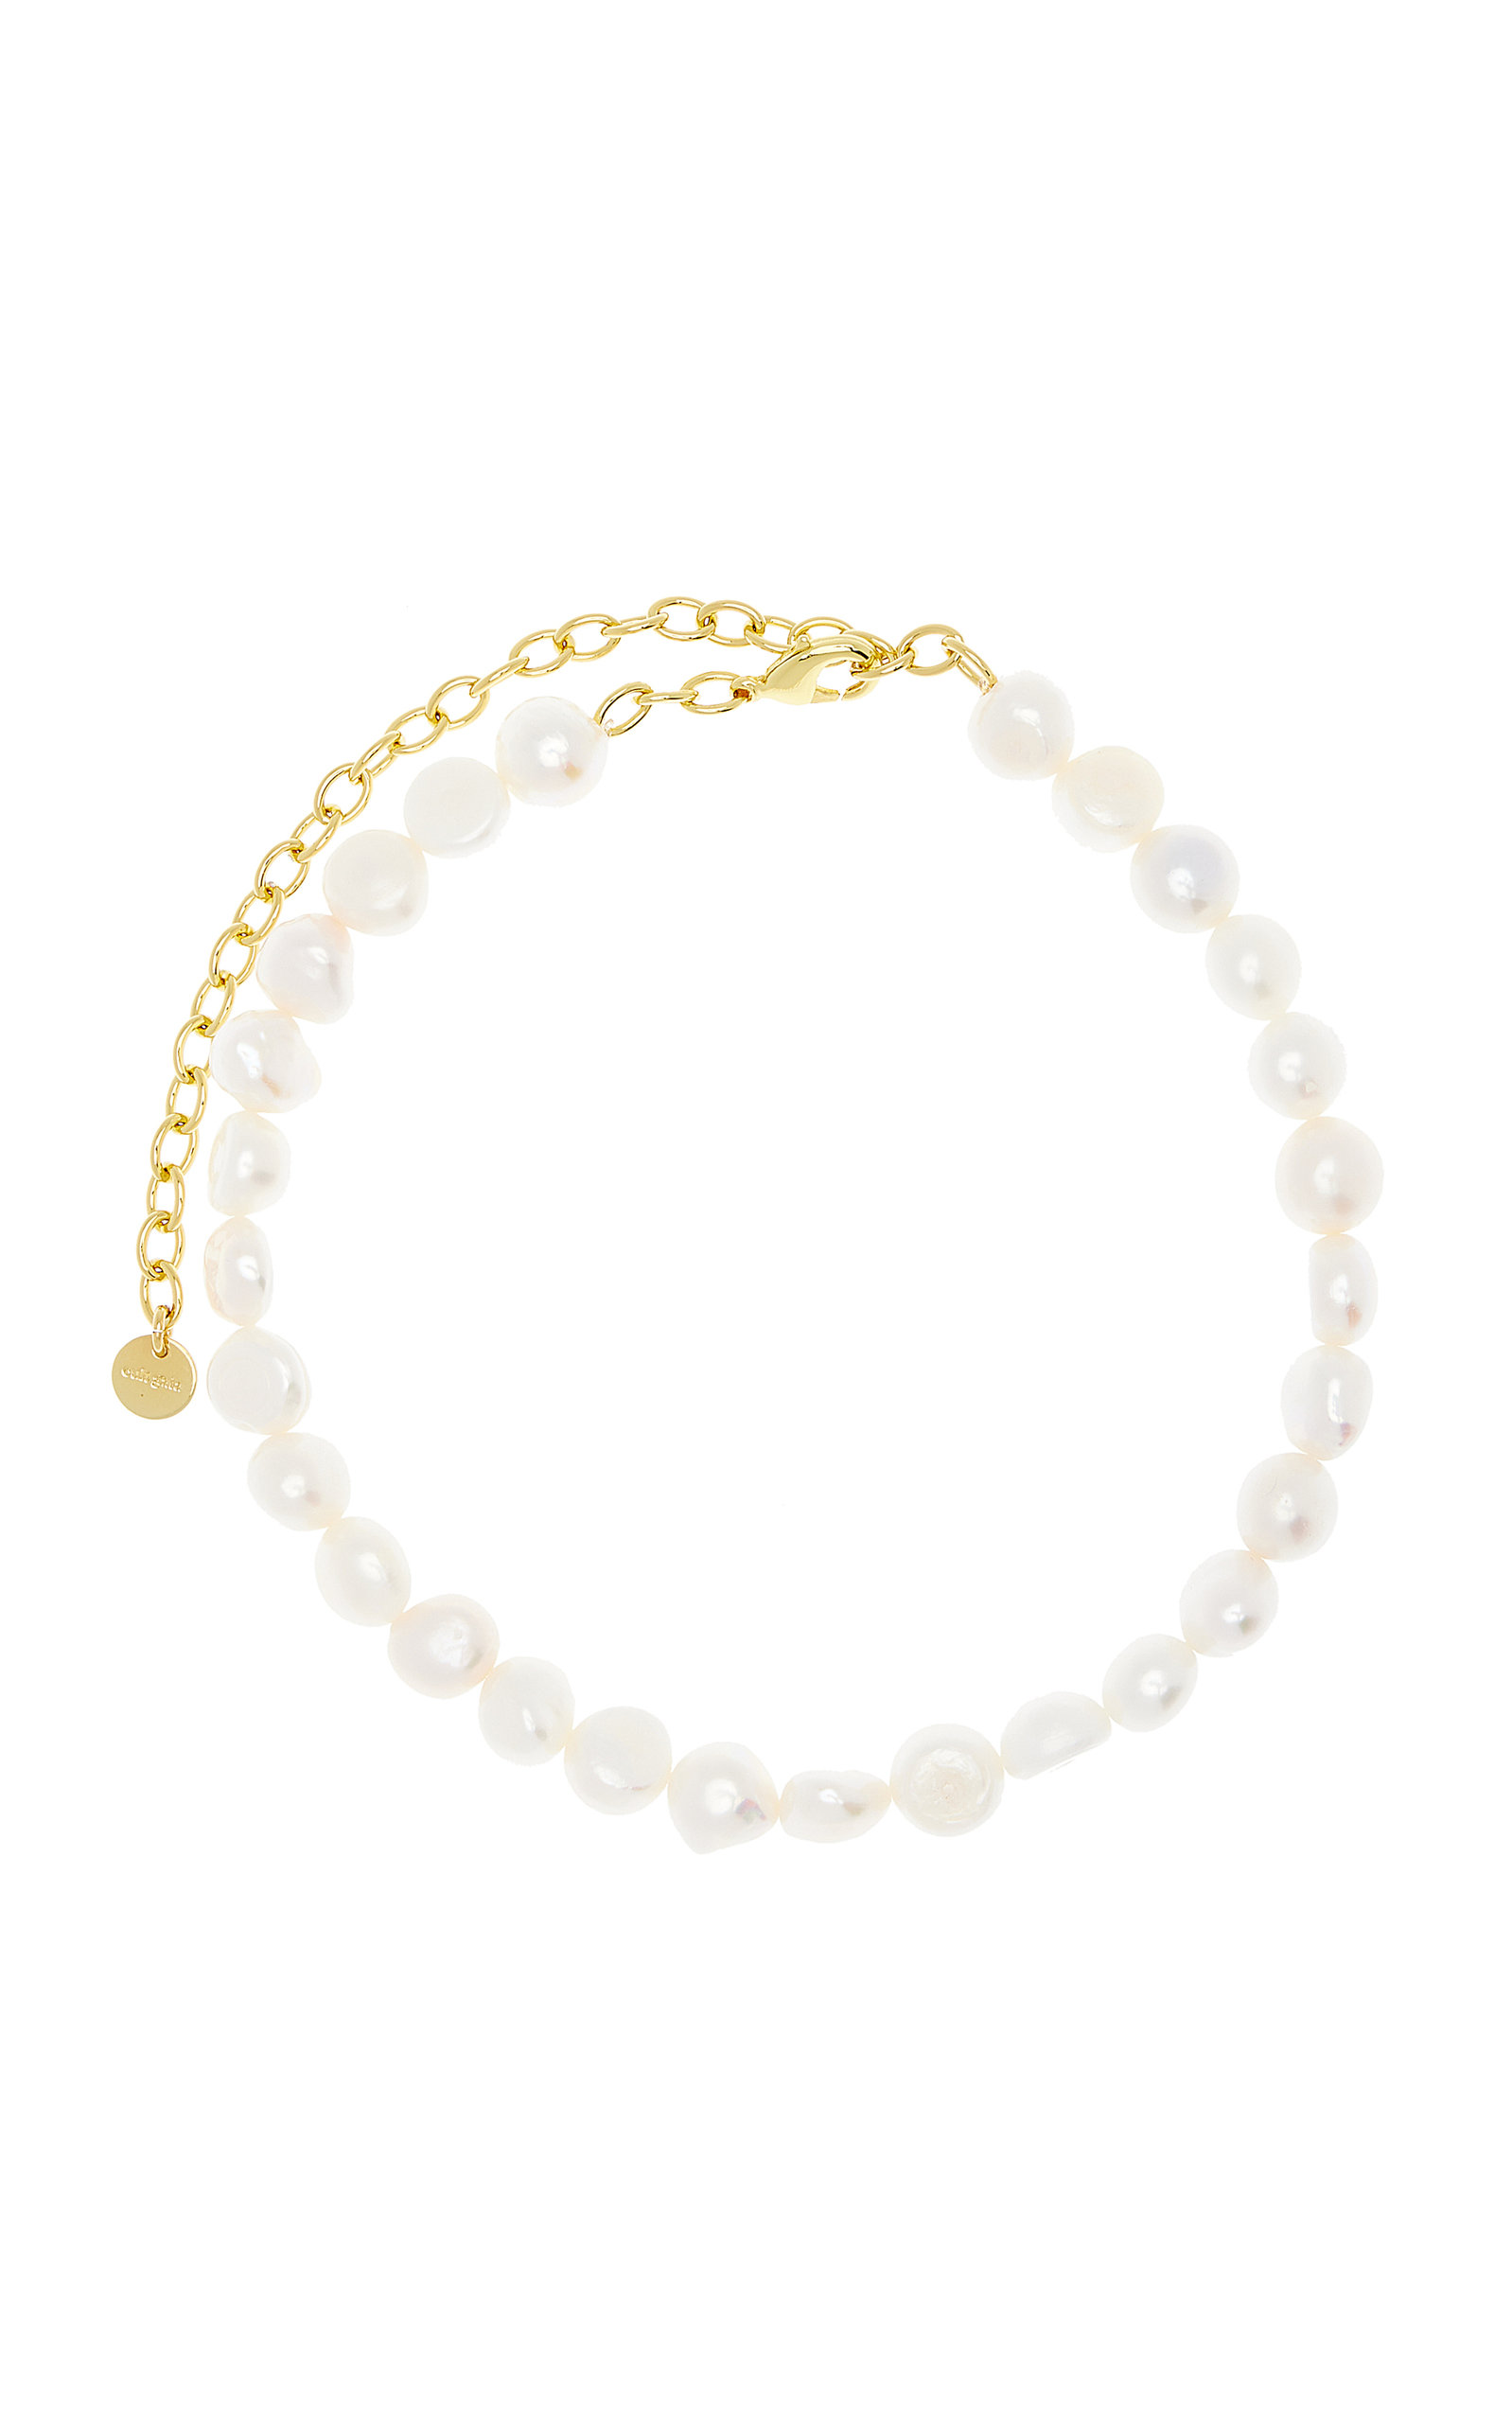 Cult Gaia - Women's Melody Pearl Choker Necklace - White - OS - Moda Operandi - Gifts For Her